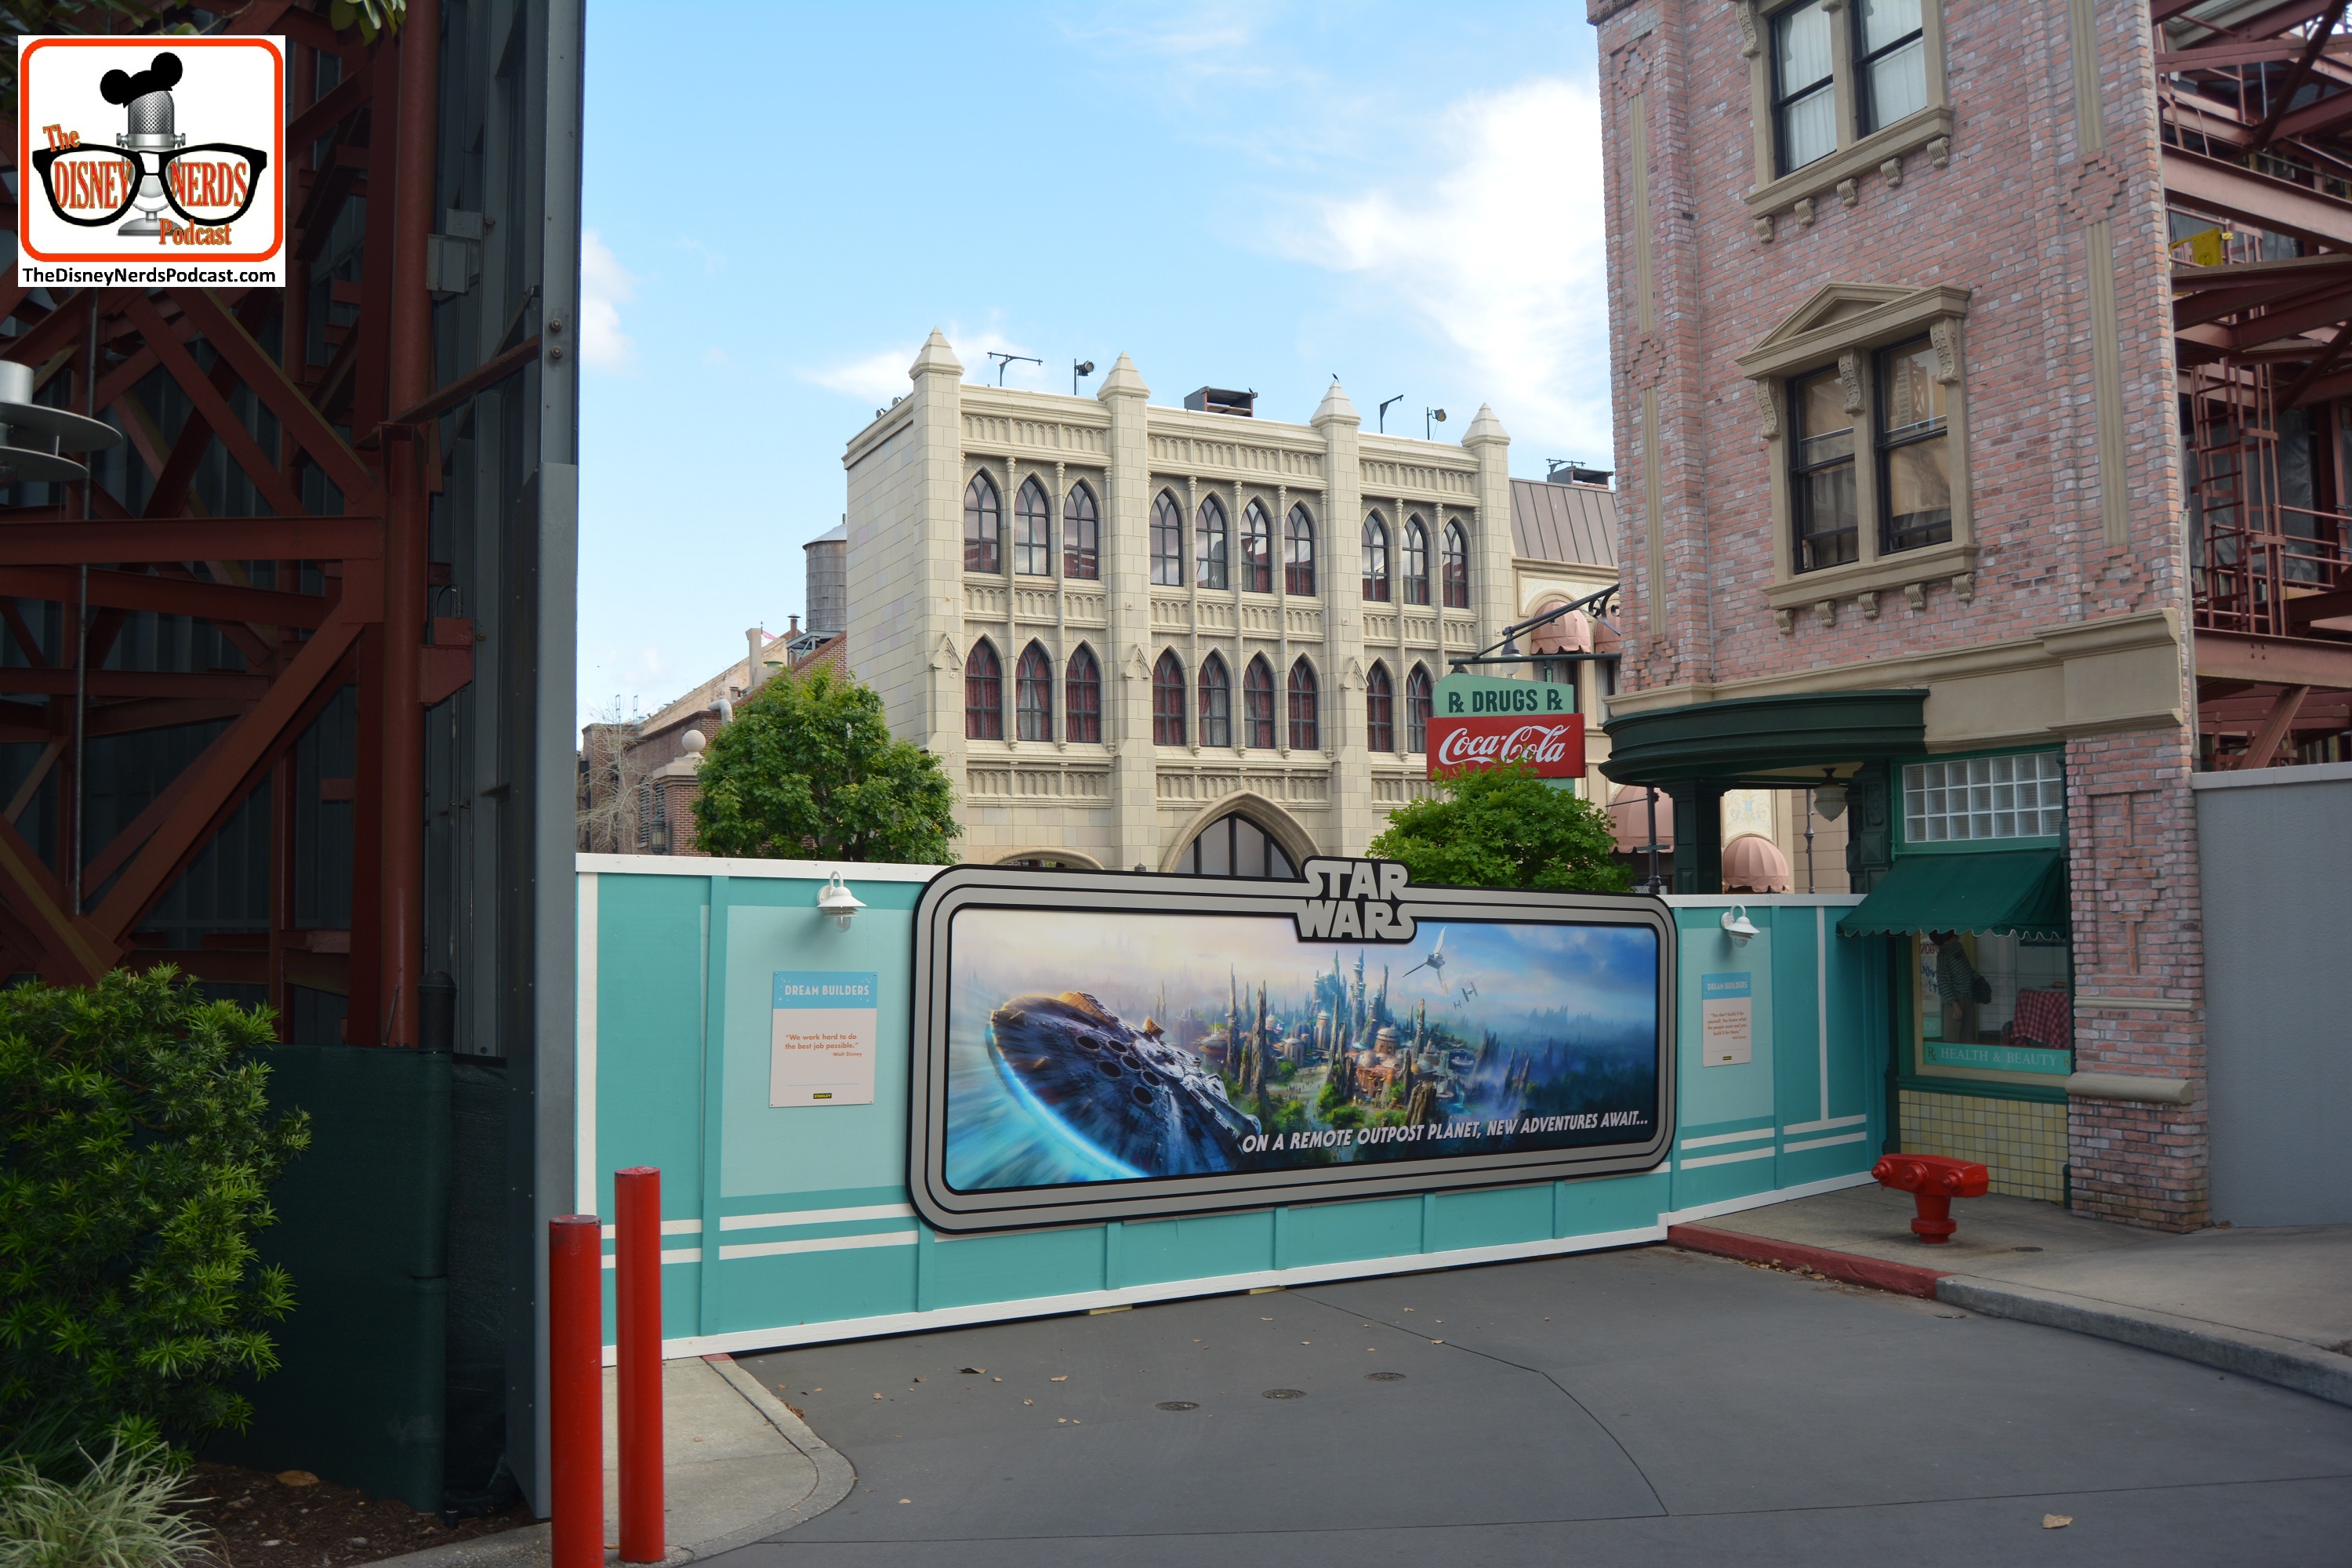 DNP April 2016 Photo Report: Hollywood Studios: Walls in the newly named Muppet Courtyard - Streets of American completely removed.